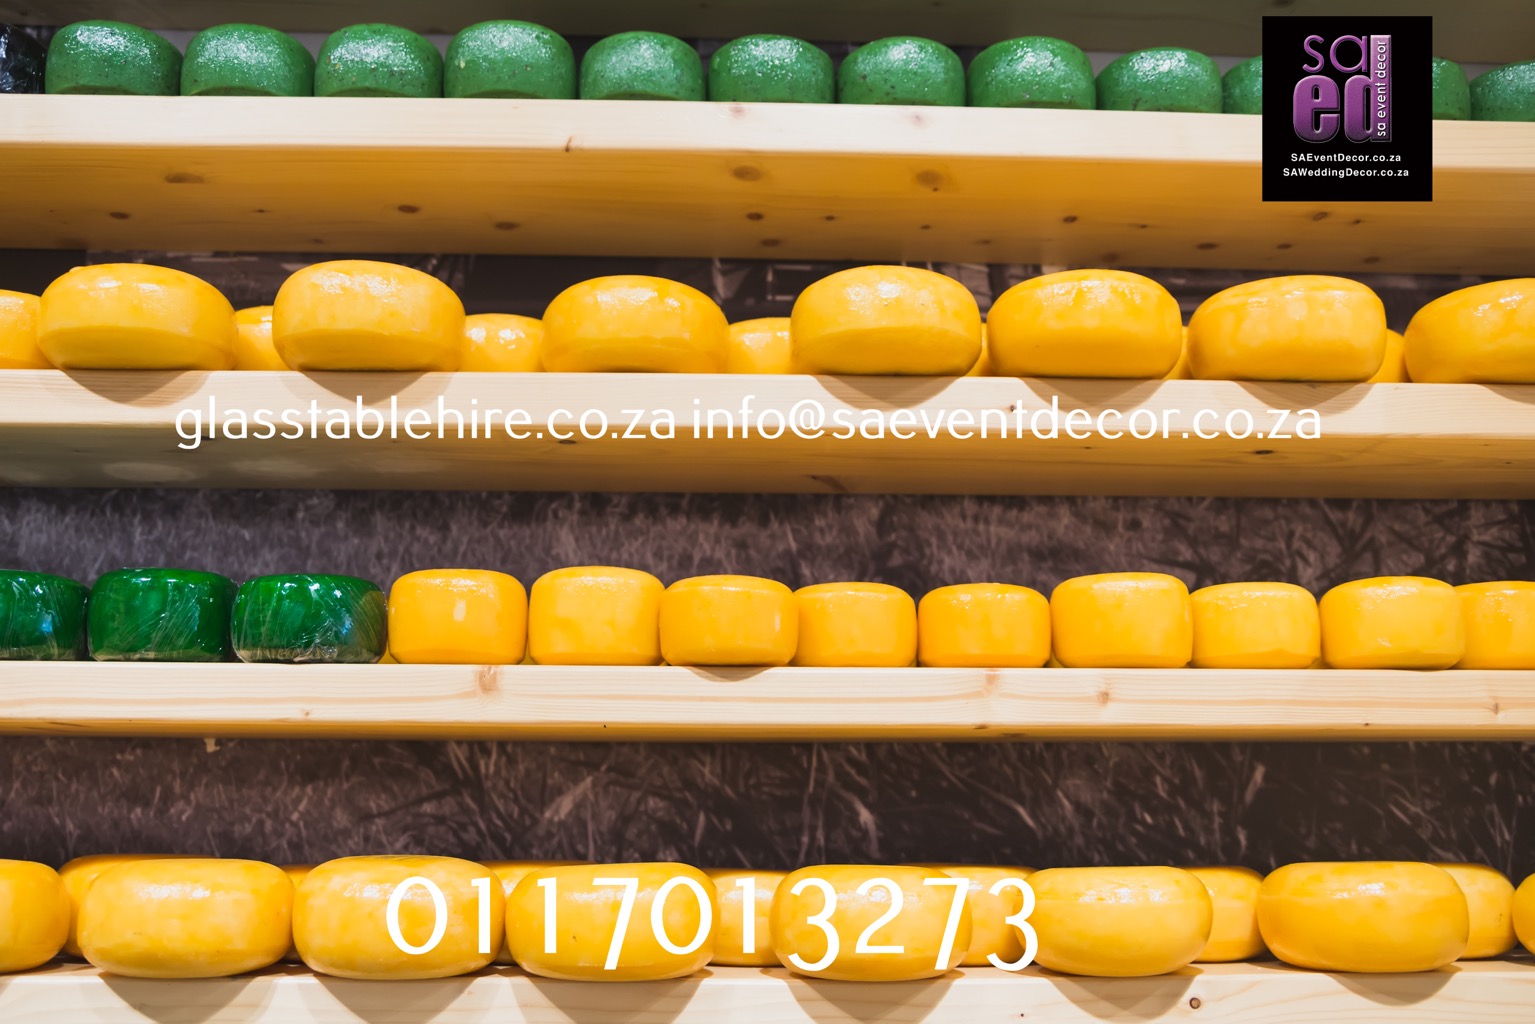 Cheese Themed backdrop Hire